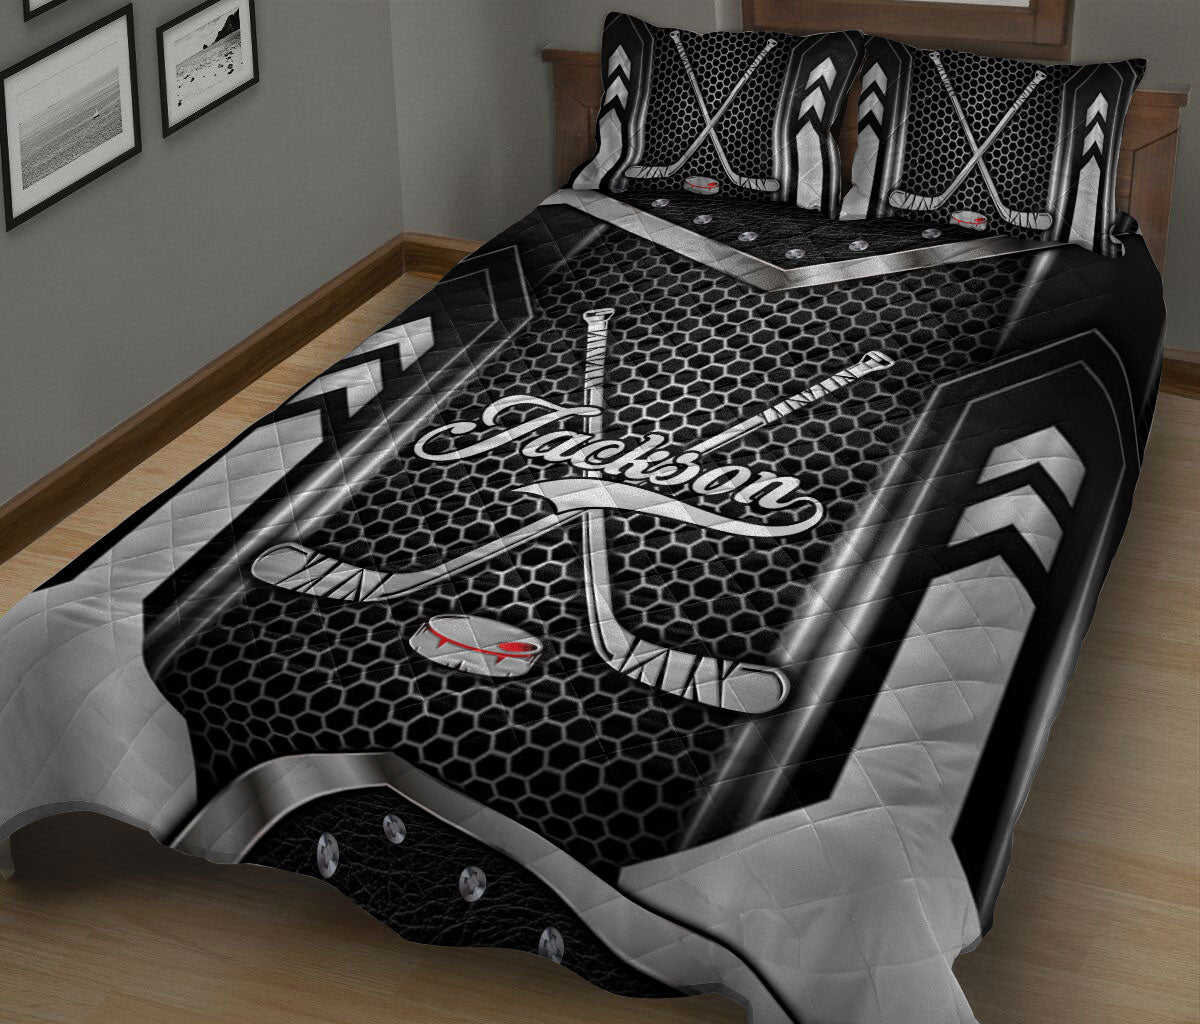 Ohaprints-Quilt-Bed-Set-Pillowcase-Hockey-Ball-Gift-For-Sport-Lover-B&W-Pattern-Custom-Personalized-Name-Blanket-Bedspread-Bedding-690-King (90'' x 100'')